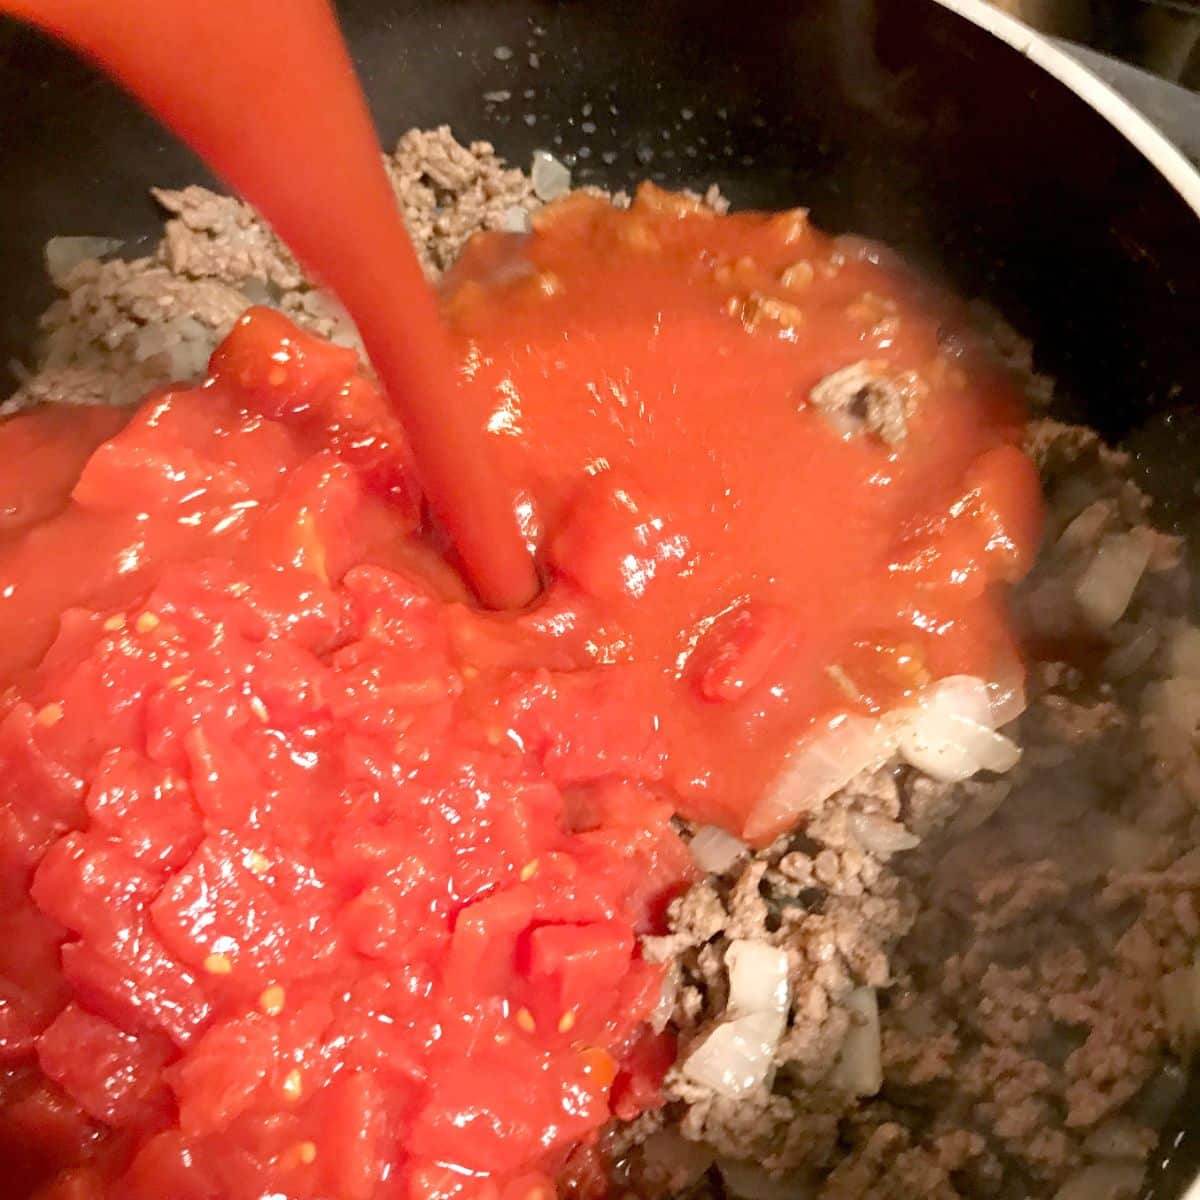 Ground beef, onions, tomatoes and tomato sauce in a large skillet